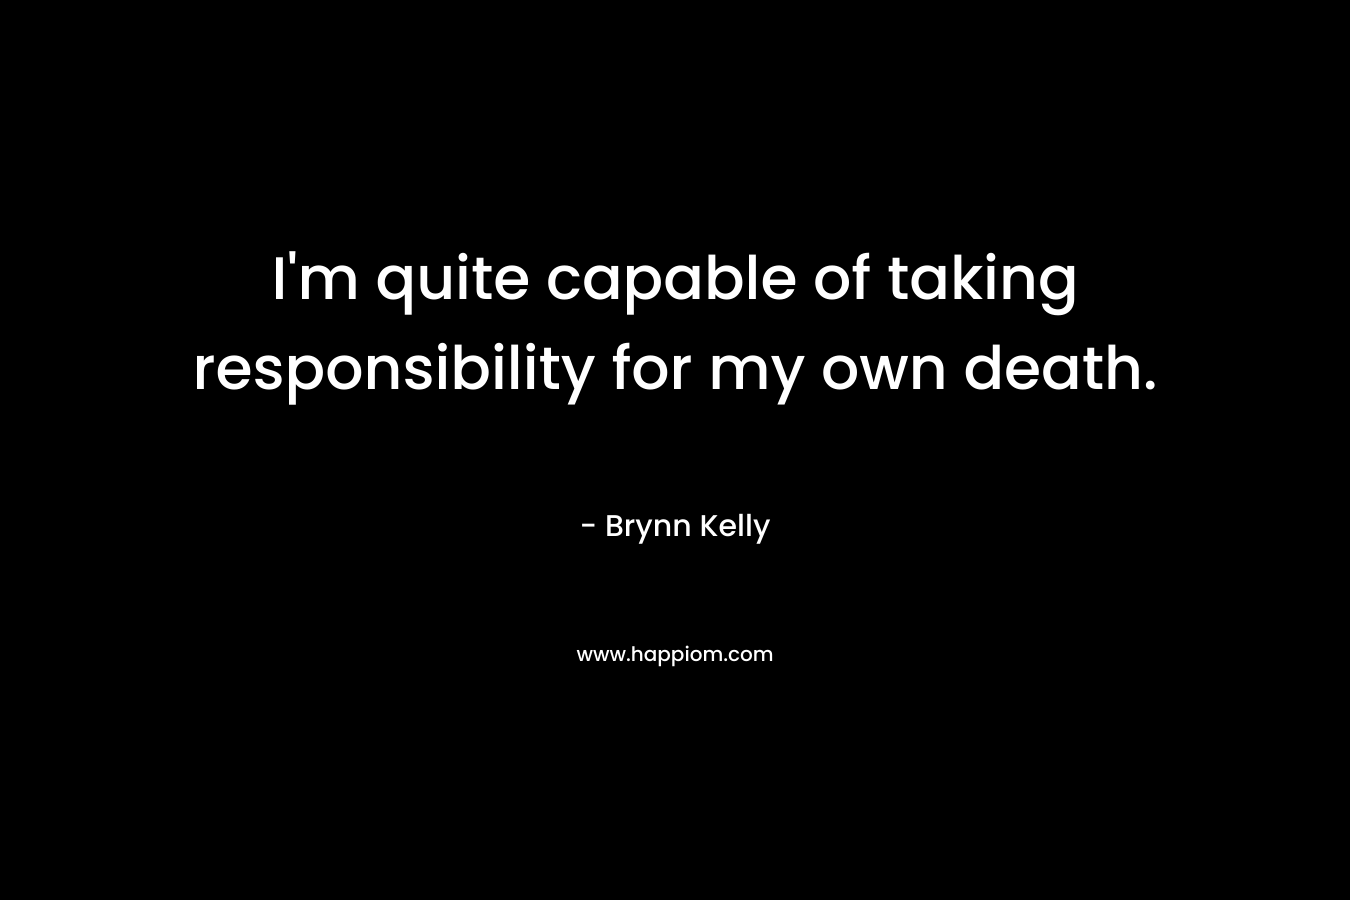 I'm quite capable of taking responsibility for my own death.